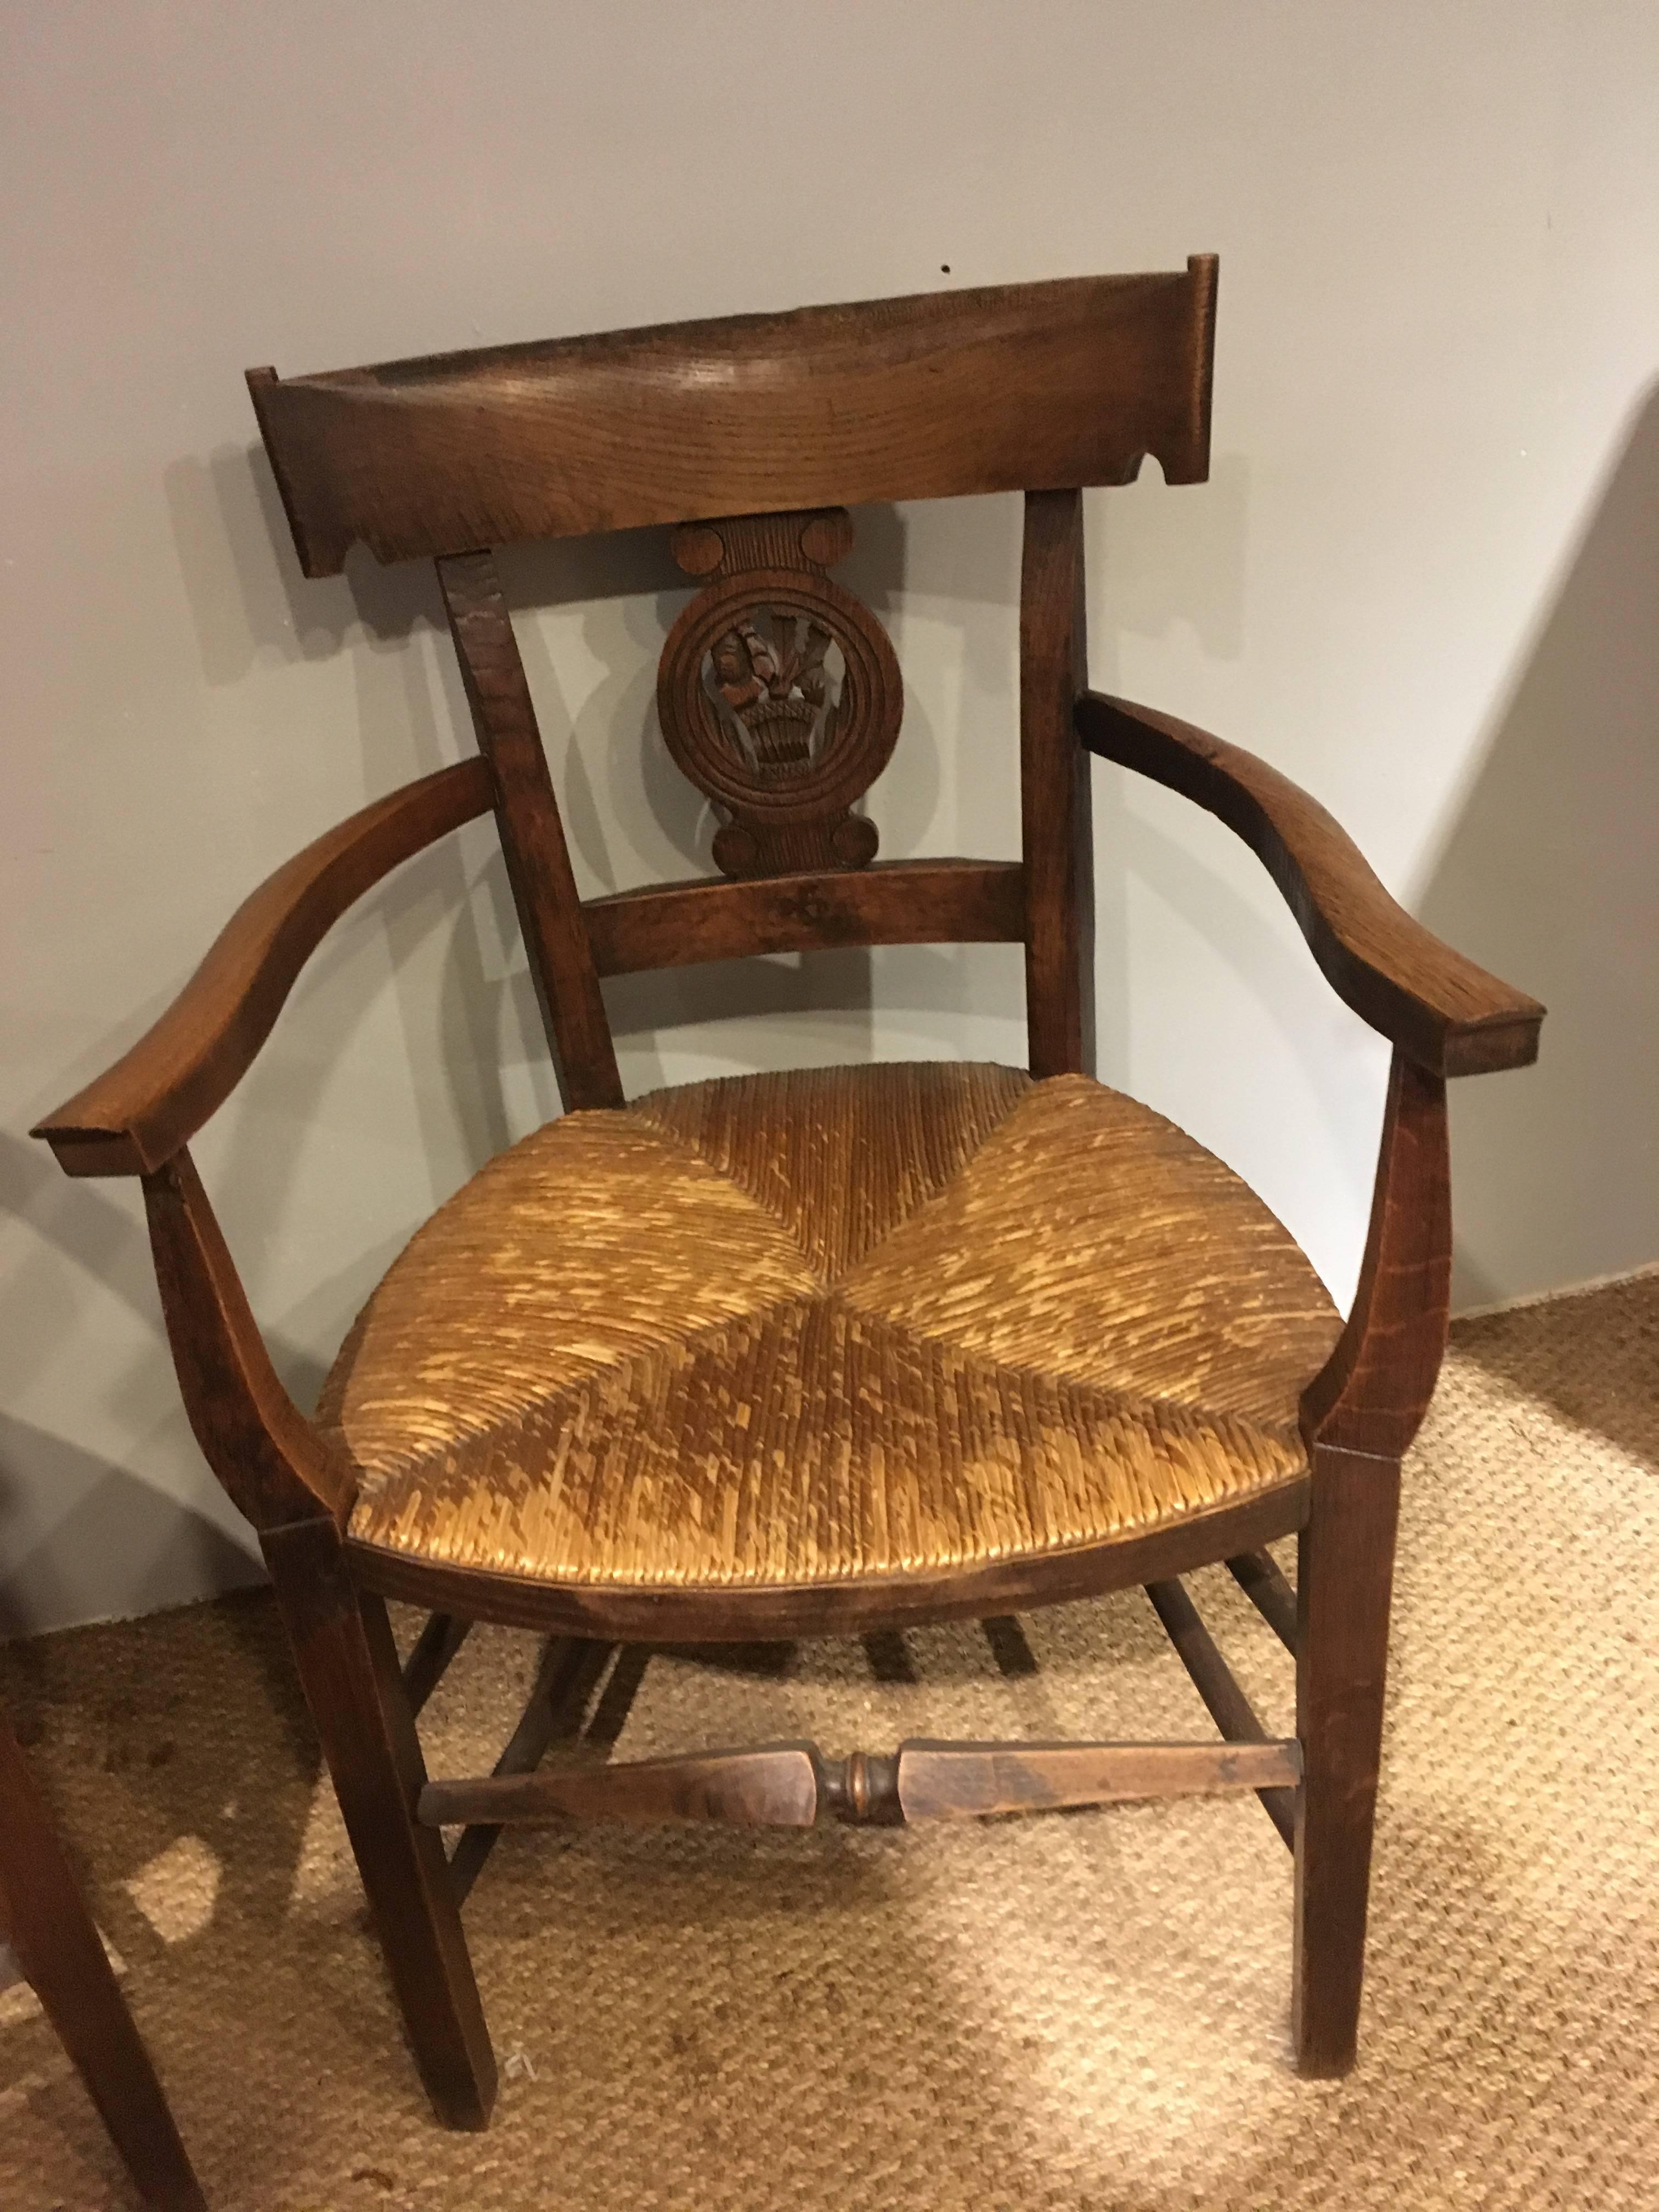 Very stylish pair of oak early 20th century rush seated country carvers chairs 
All the joints are firm and the rush seats are in good order,
circa 1920. 
Measures: Depth 25 inches
Width 21 inches
Height 35 inches.